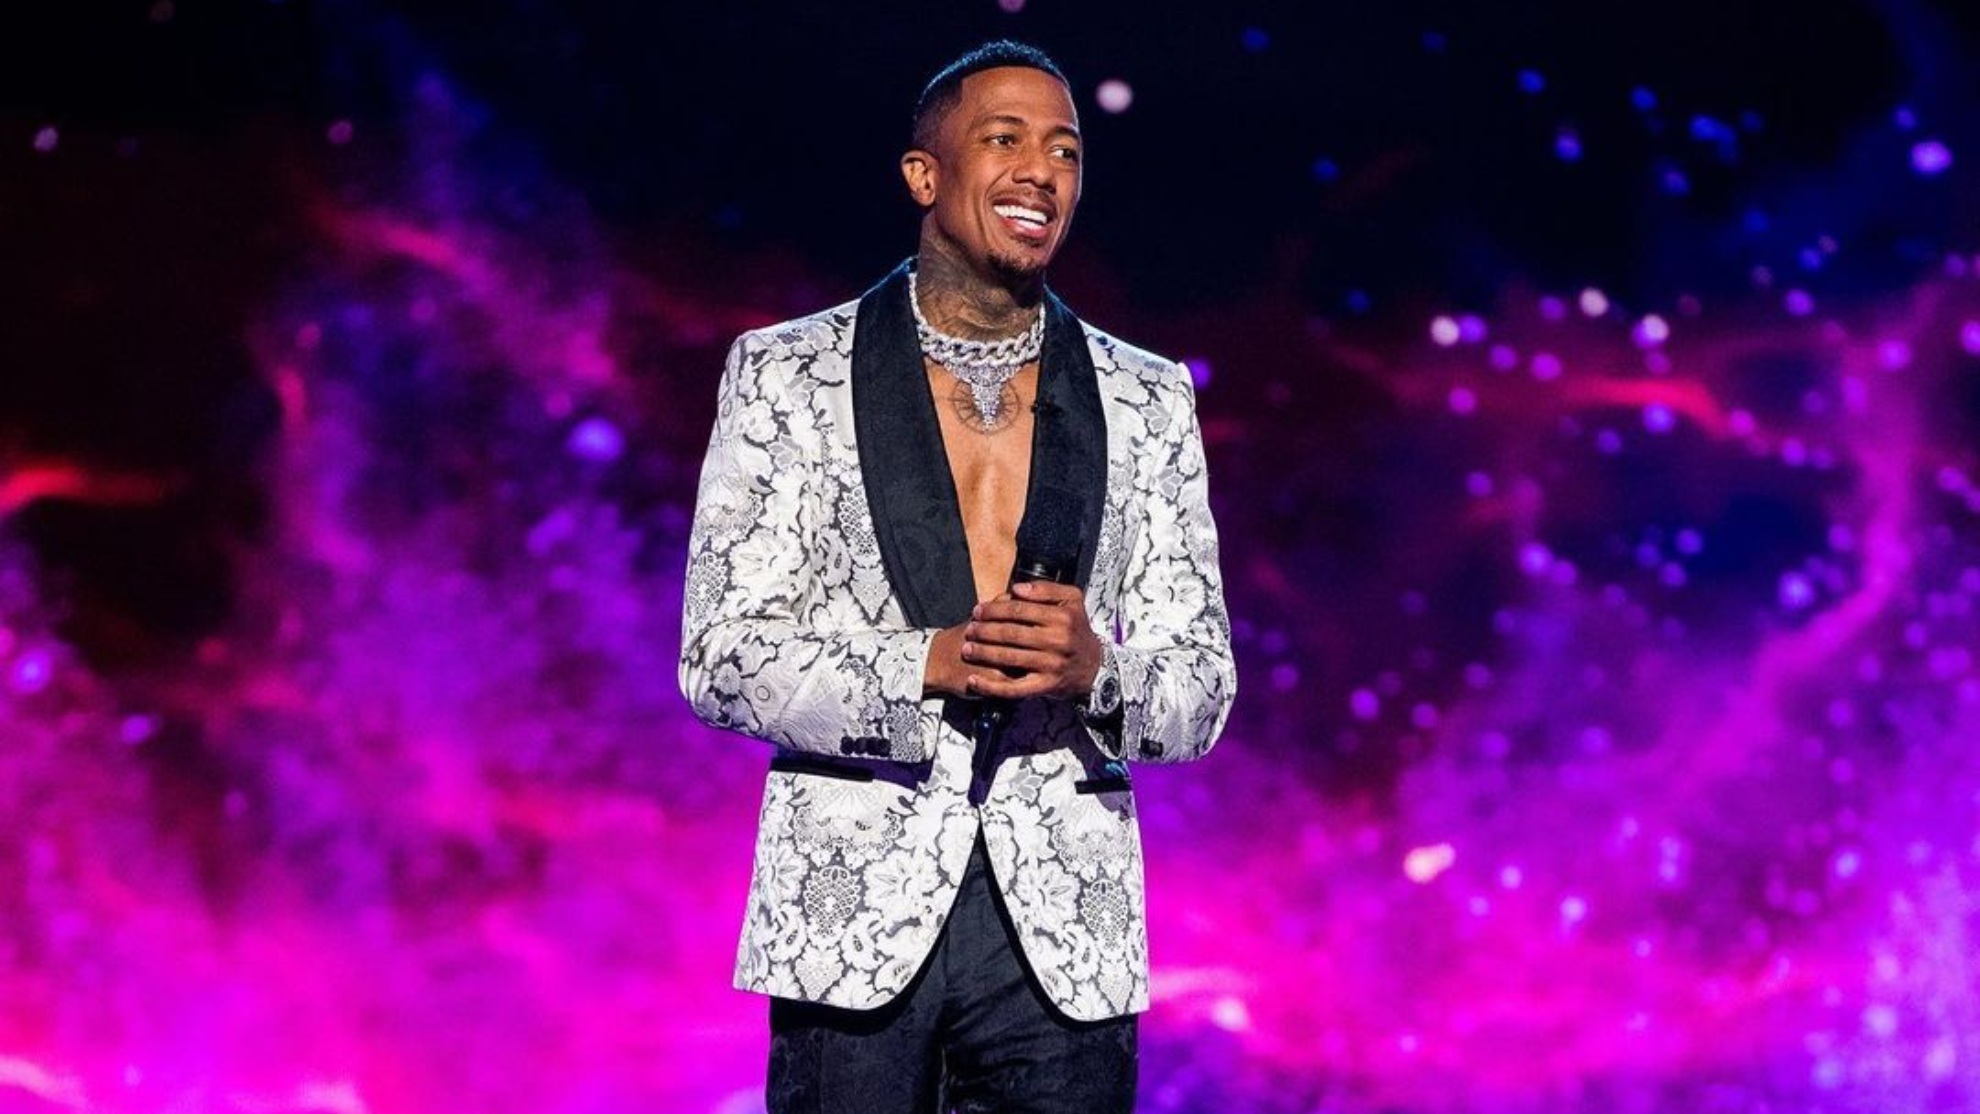 Nick Cannon, a well-known American TV host, has made headlines recently after he revealed that he doesn't give a "monthly allowance" or a "set amount" of money to the six women he has children with